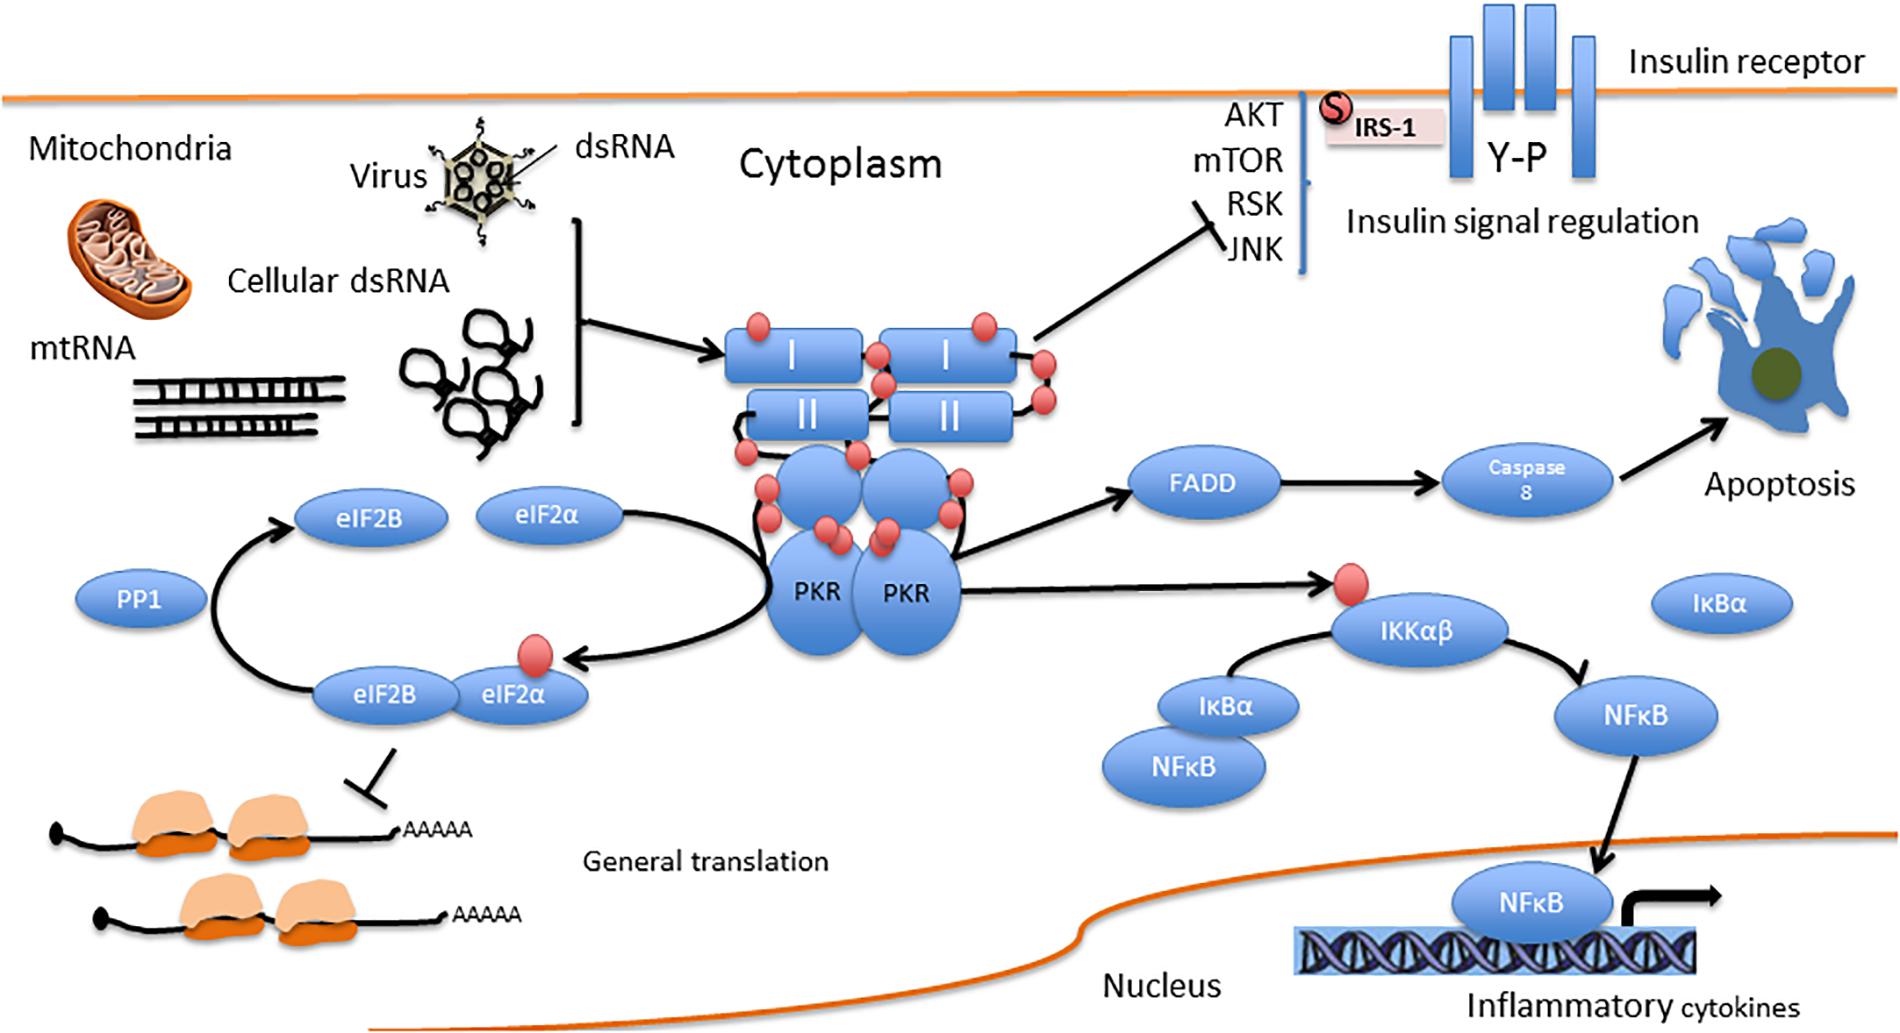 Diagram showing various pathways to apoptosis - programmed cell suicide